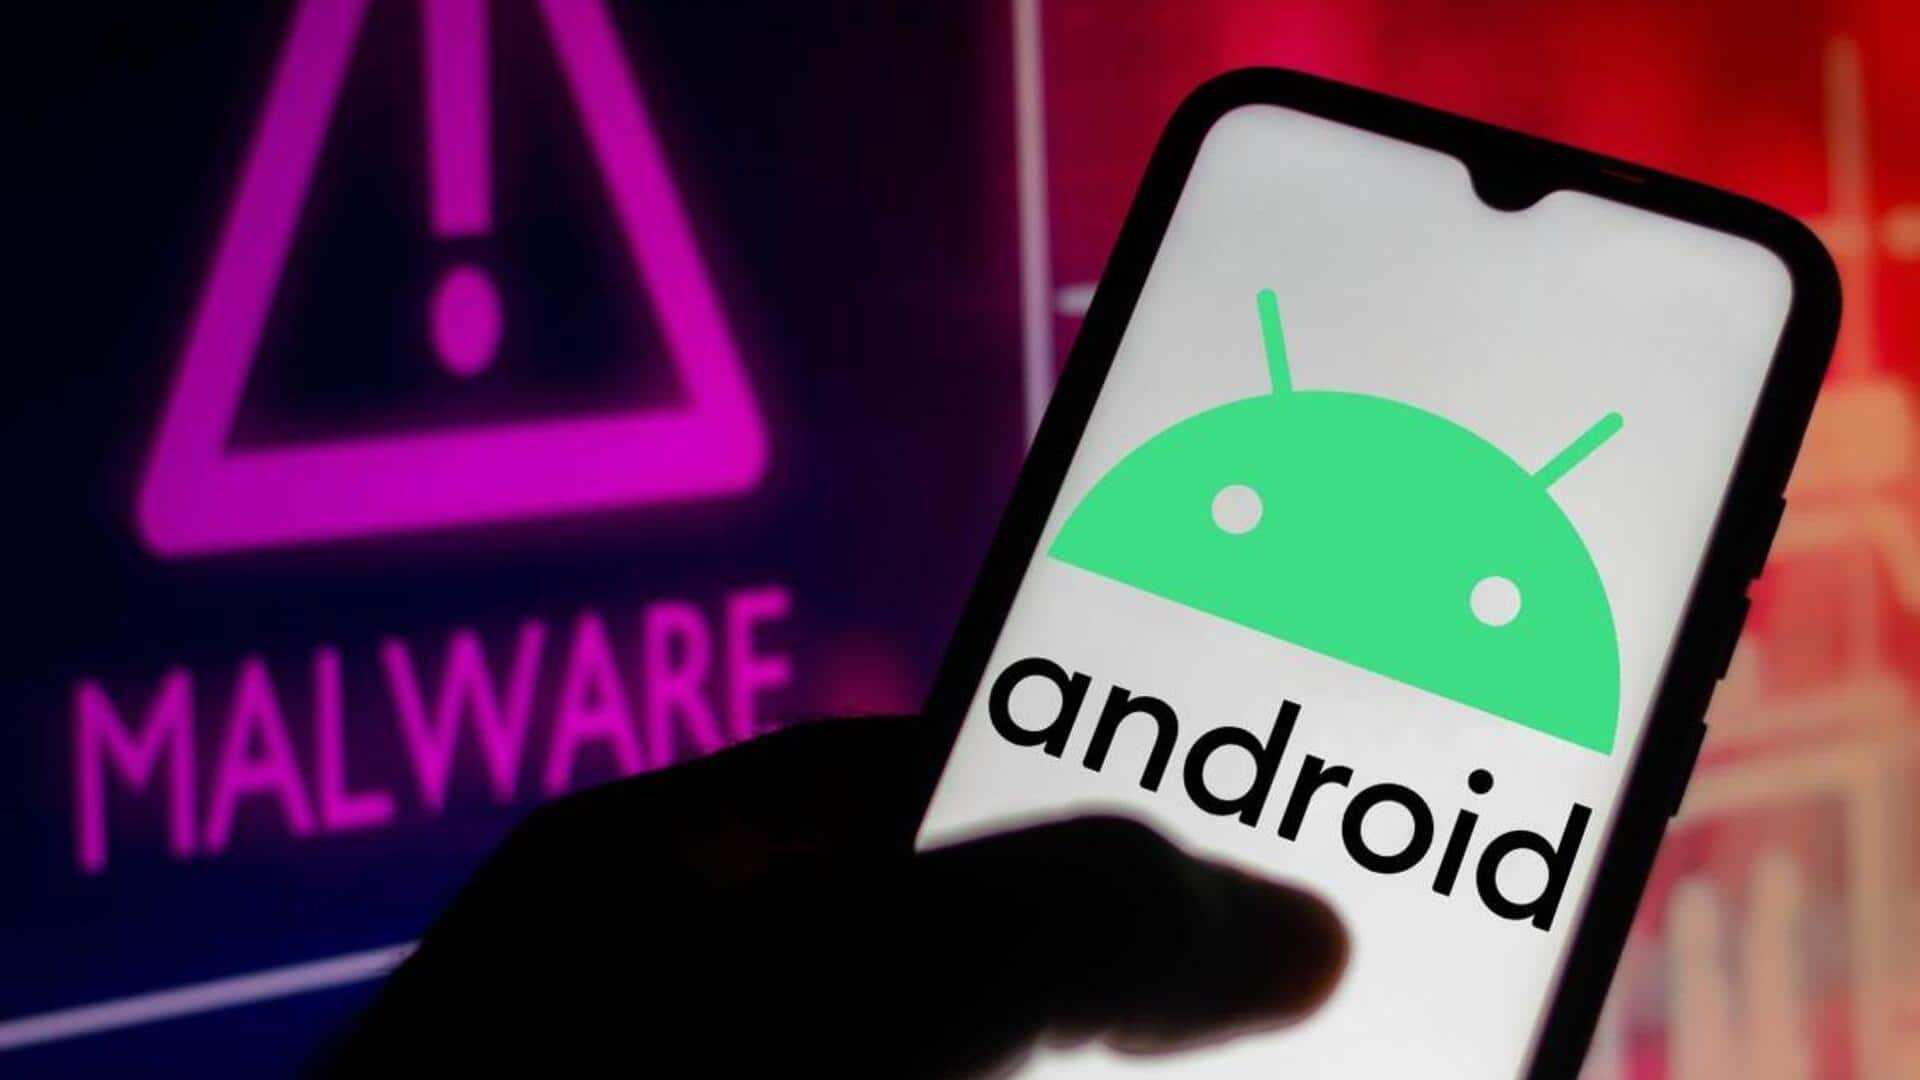 New Android malware auto-executes itself to steal user data